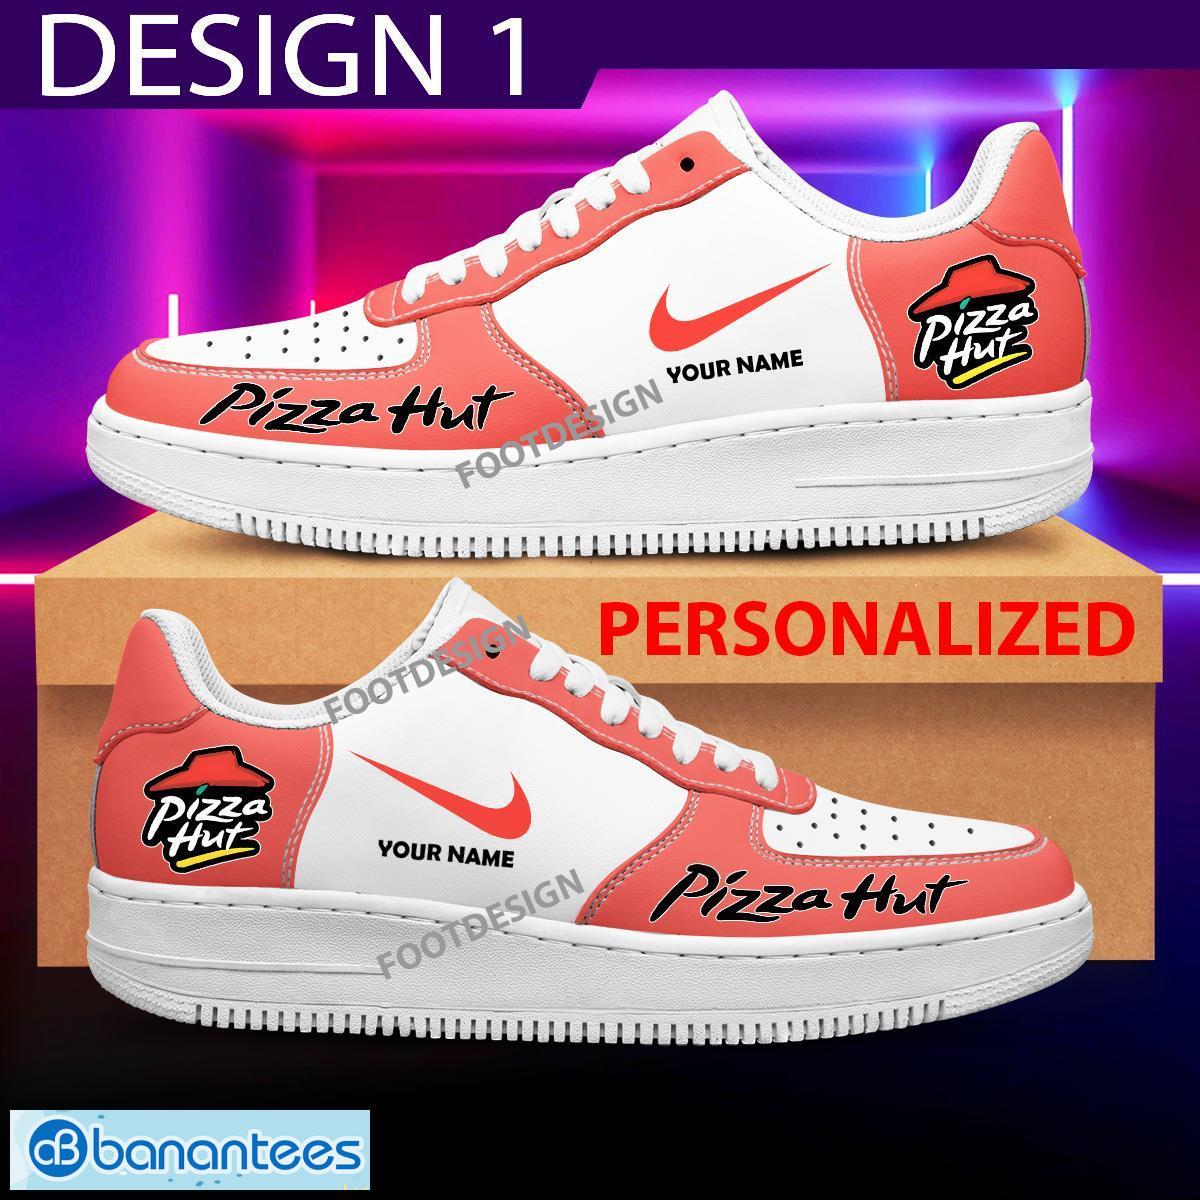 Custom Name Pizza Hut Brand Air Force 1 Sneakers New Pattern For Fans Gift AF1 Shoes - Brands Pizza Hut Air Force 1 Sneakers Custom Name Photo 1